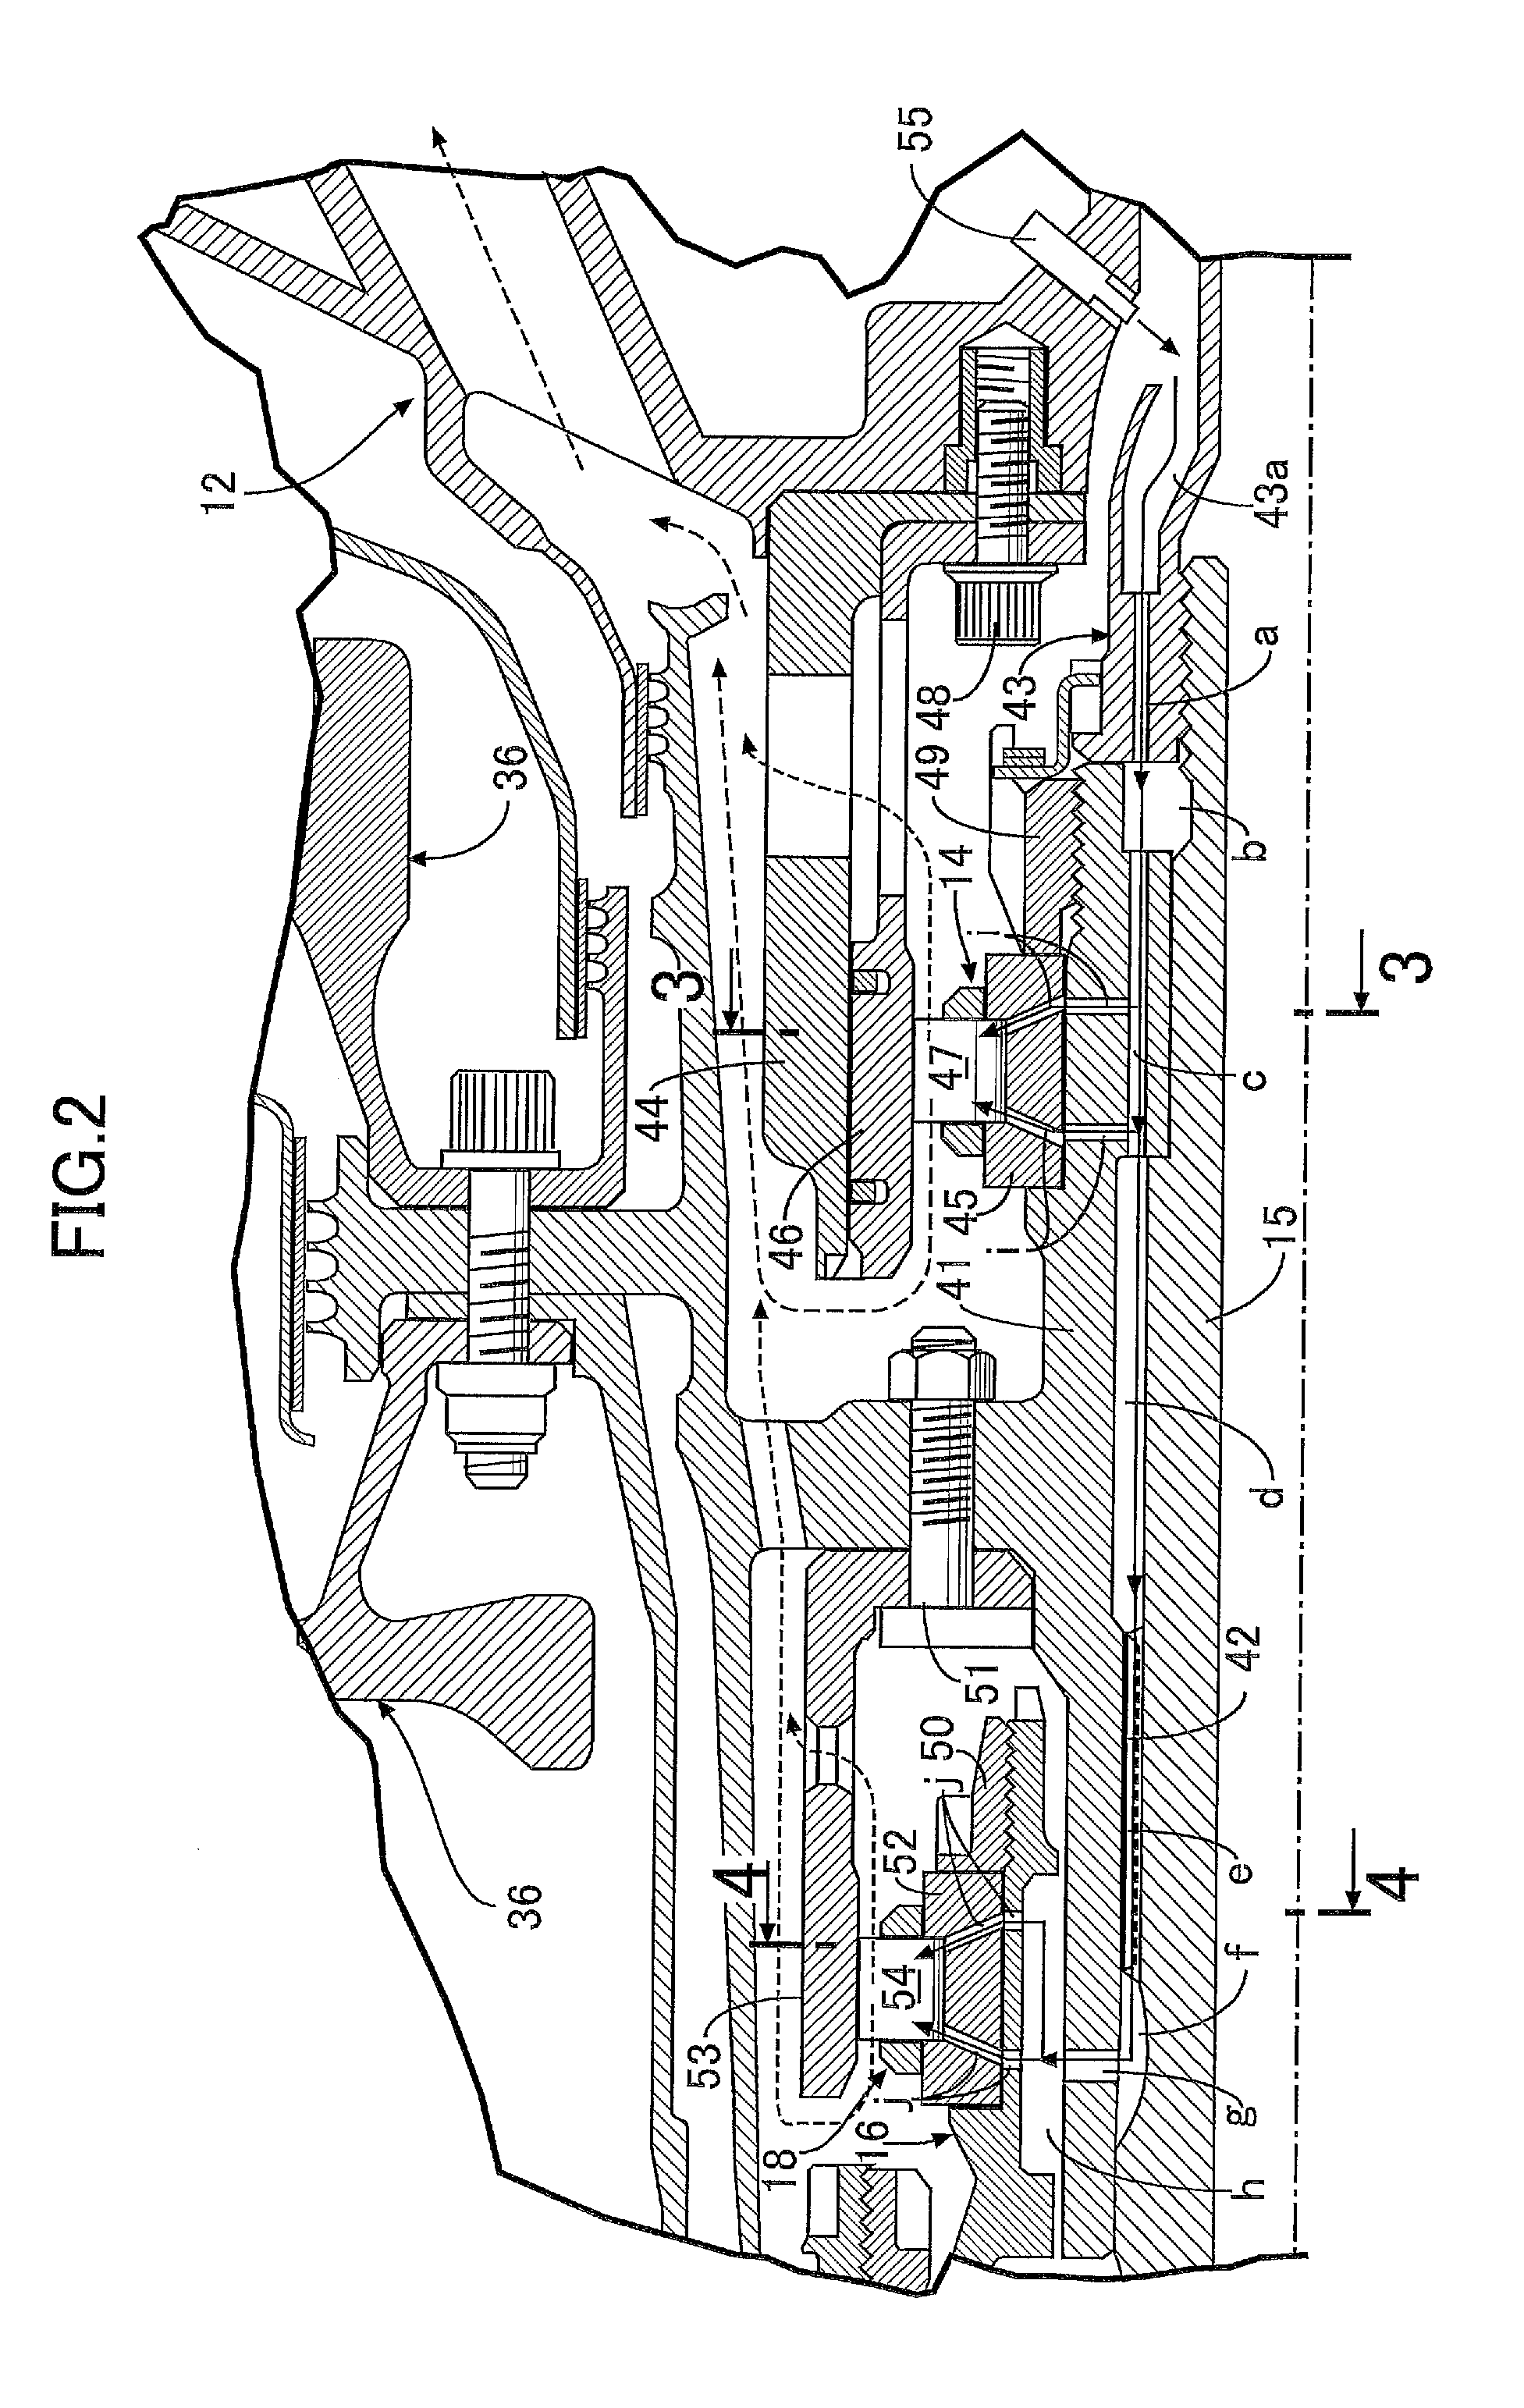 Bearing lubricating structure for gas turbine engine